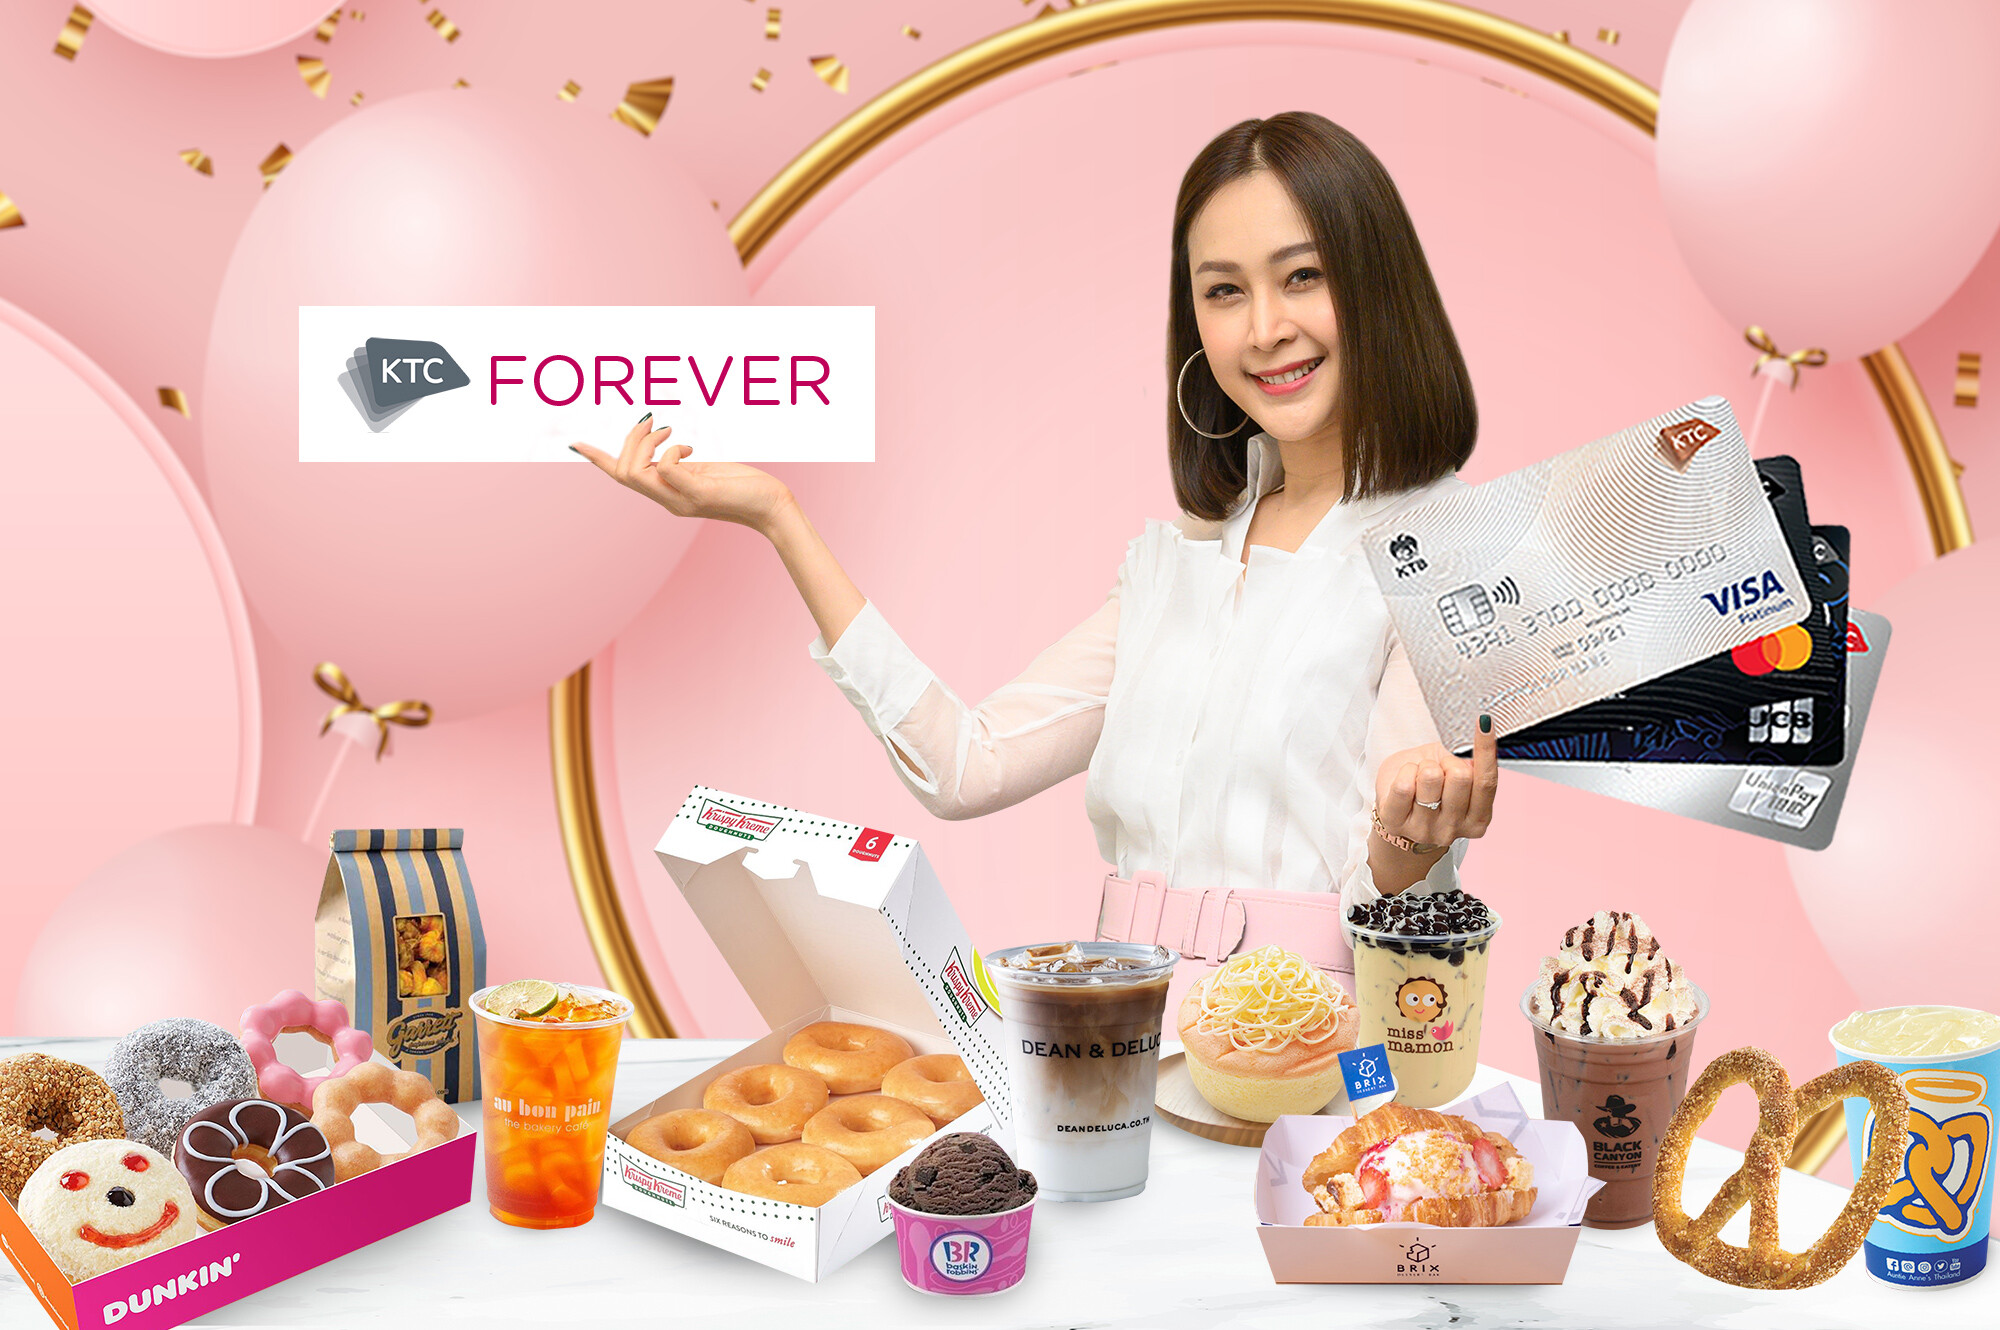 KTC jointly with 41 popular dessert stores offers cardmembers the option to redeem  249 KTC FOREVER points or more for delicious desserts and beverages